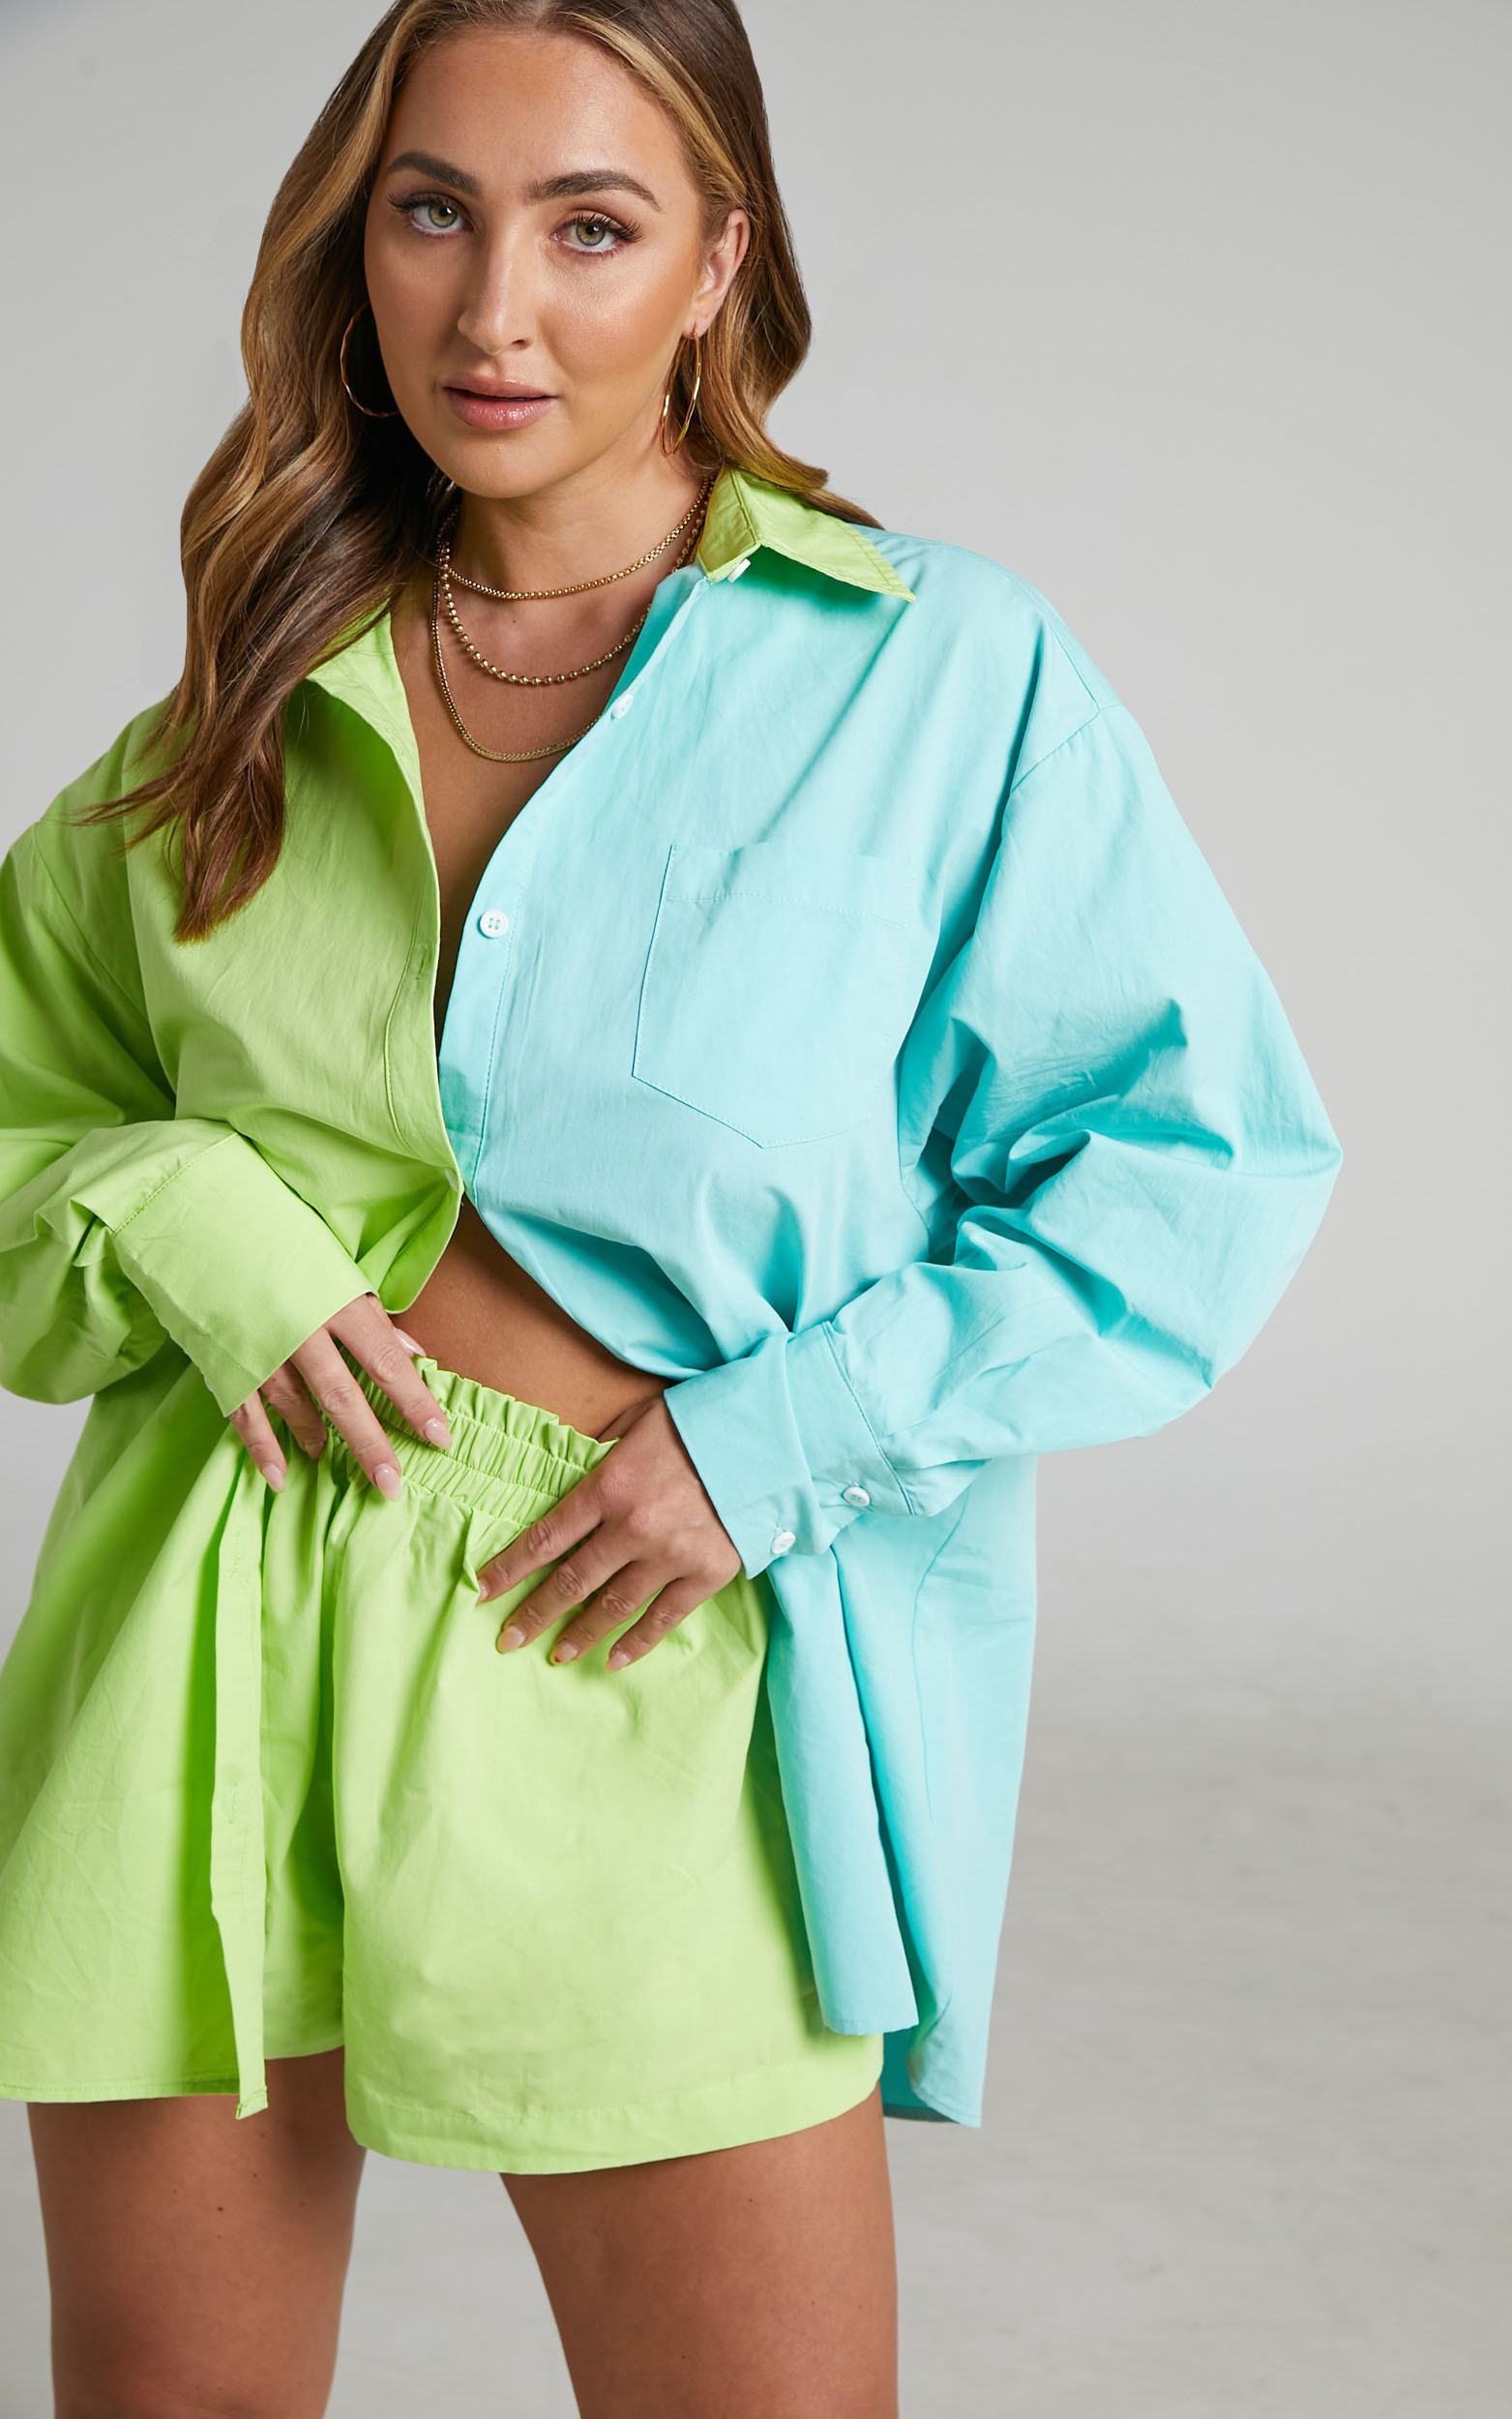 Roewe Colour Block Oversized Button Up Shirt in Lime & Seafoam - 04, GRN1, hi-res image number null